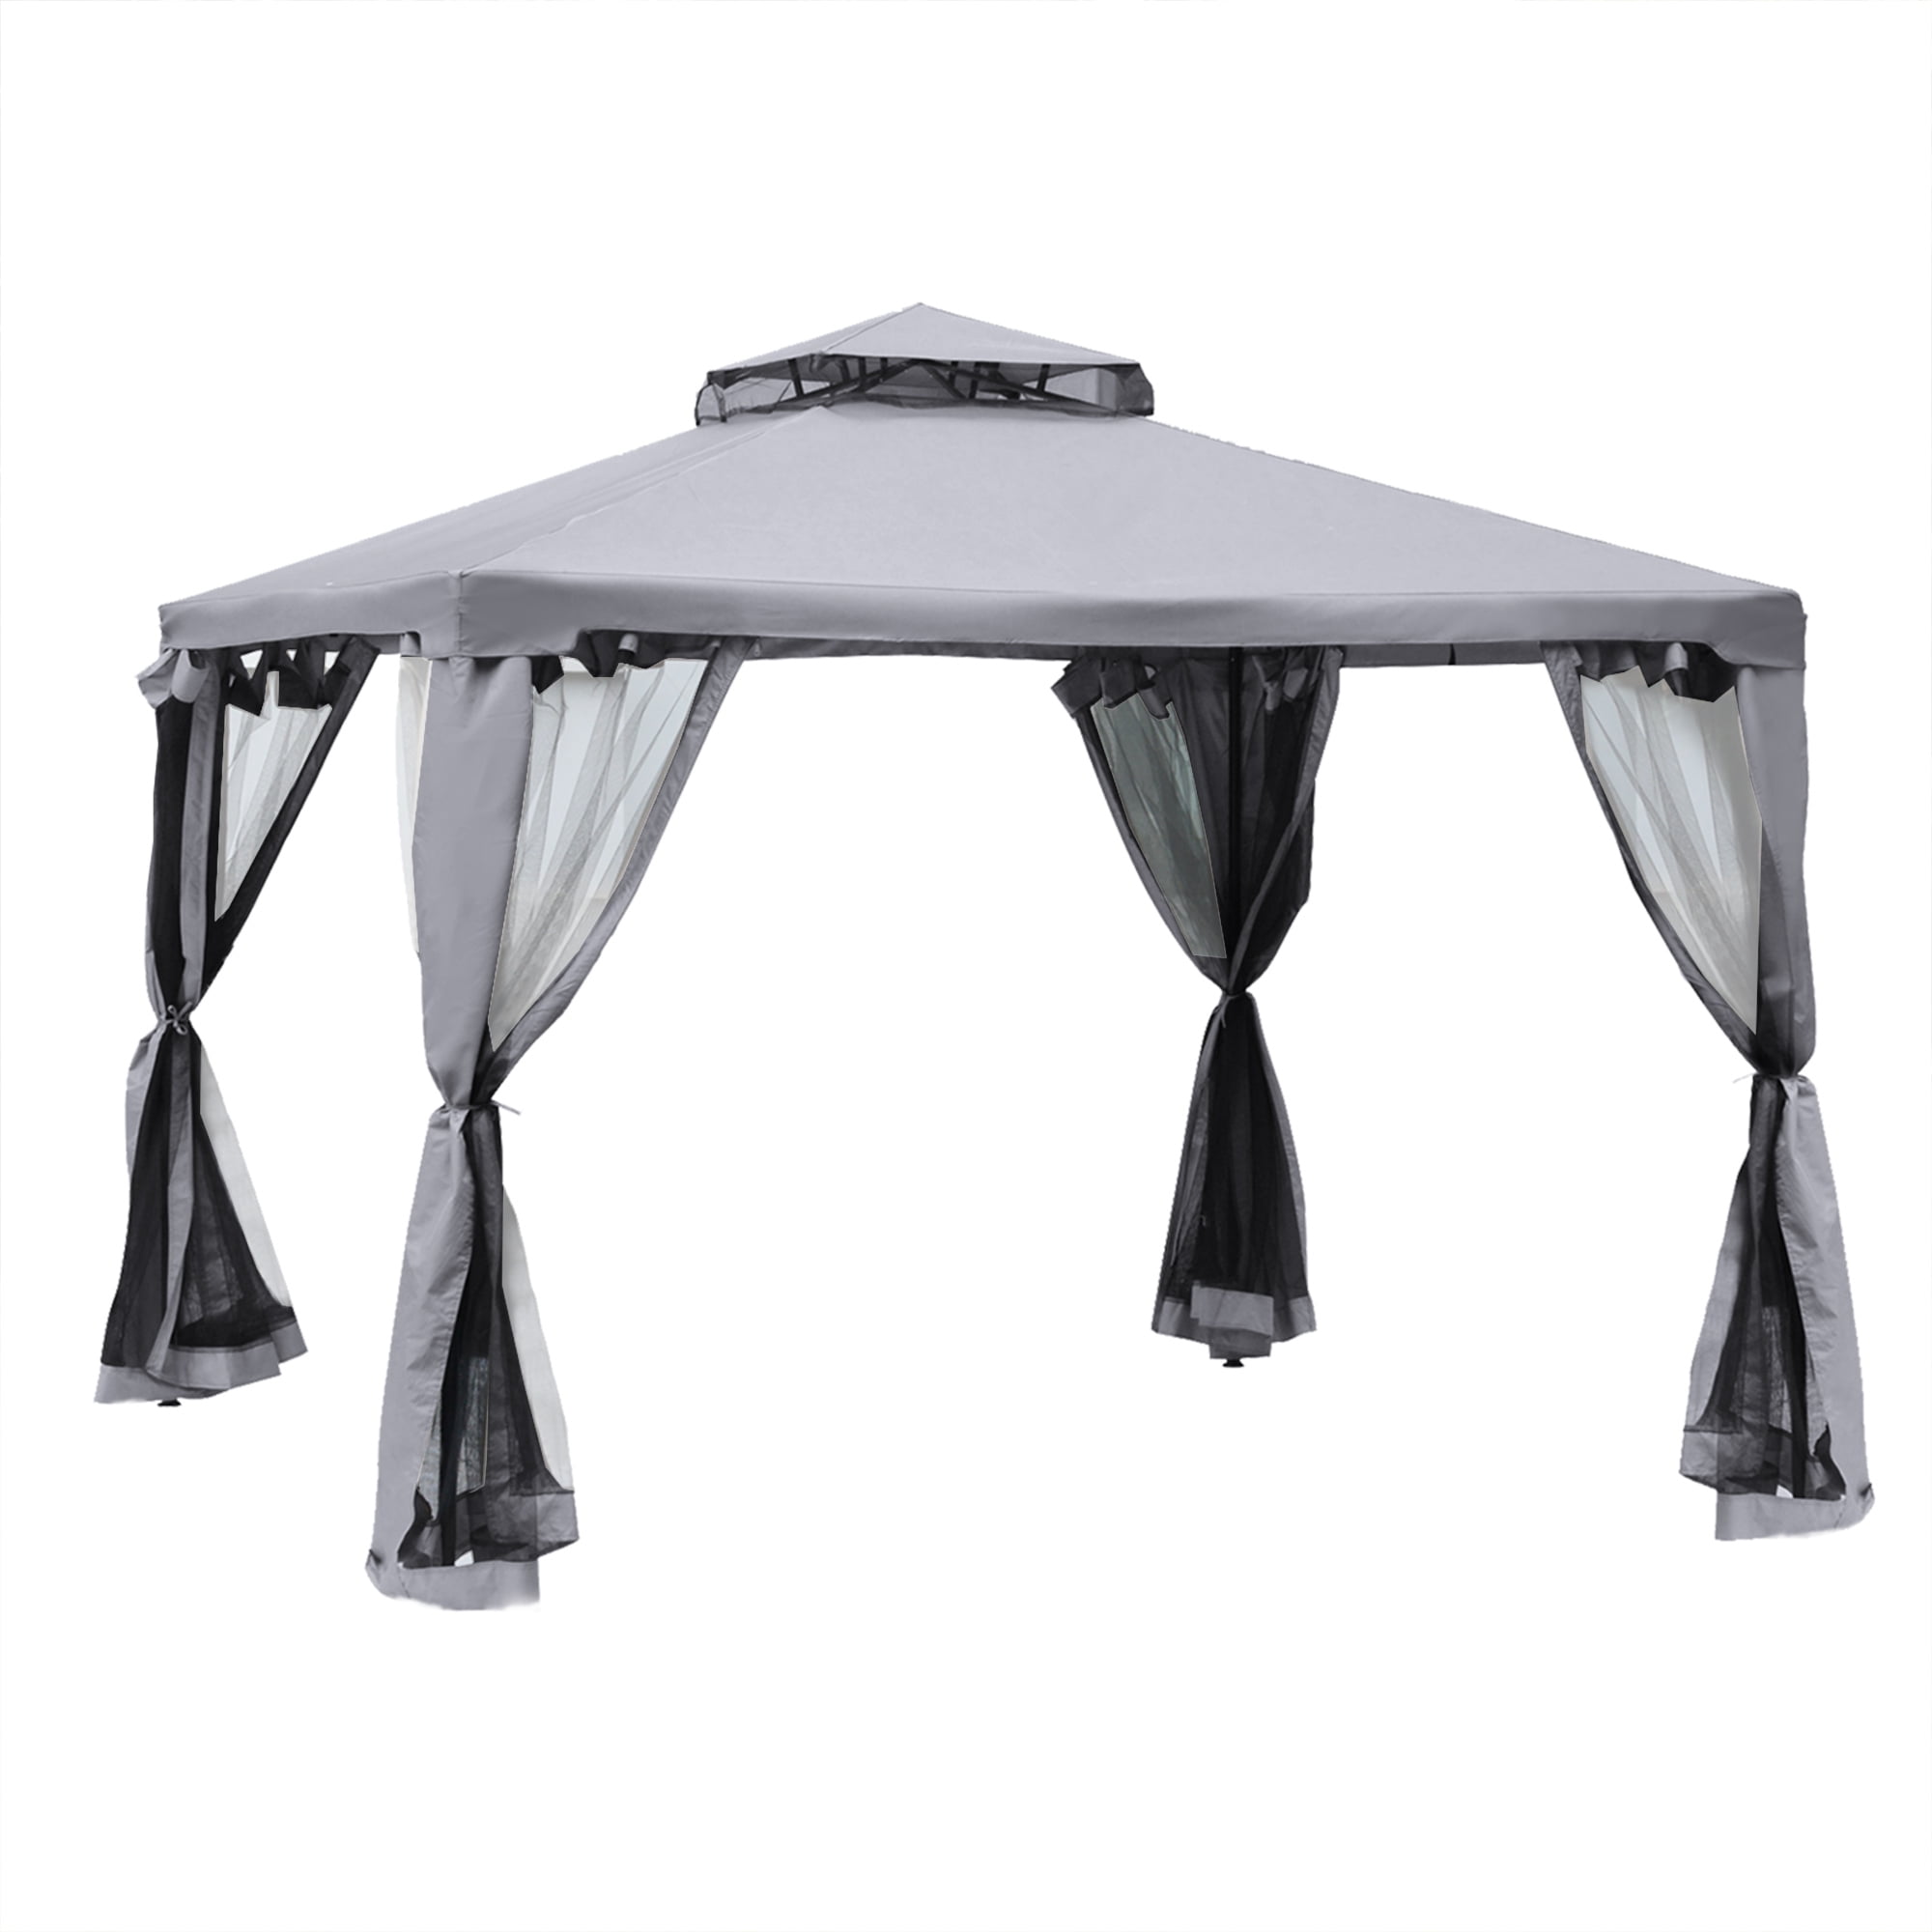 Rust Keymaya 8x5 Grill Gazebo Shelter for Patio and Outdoor Living BBQ Shelter Tent Double Tier Soft Top Canopy and Steel Frame with Bar Counters Bonus LED Light 